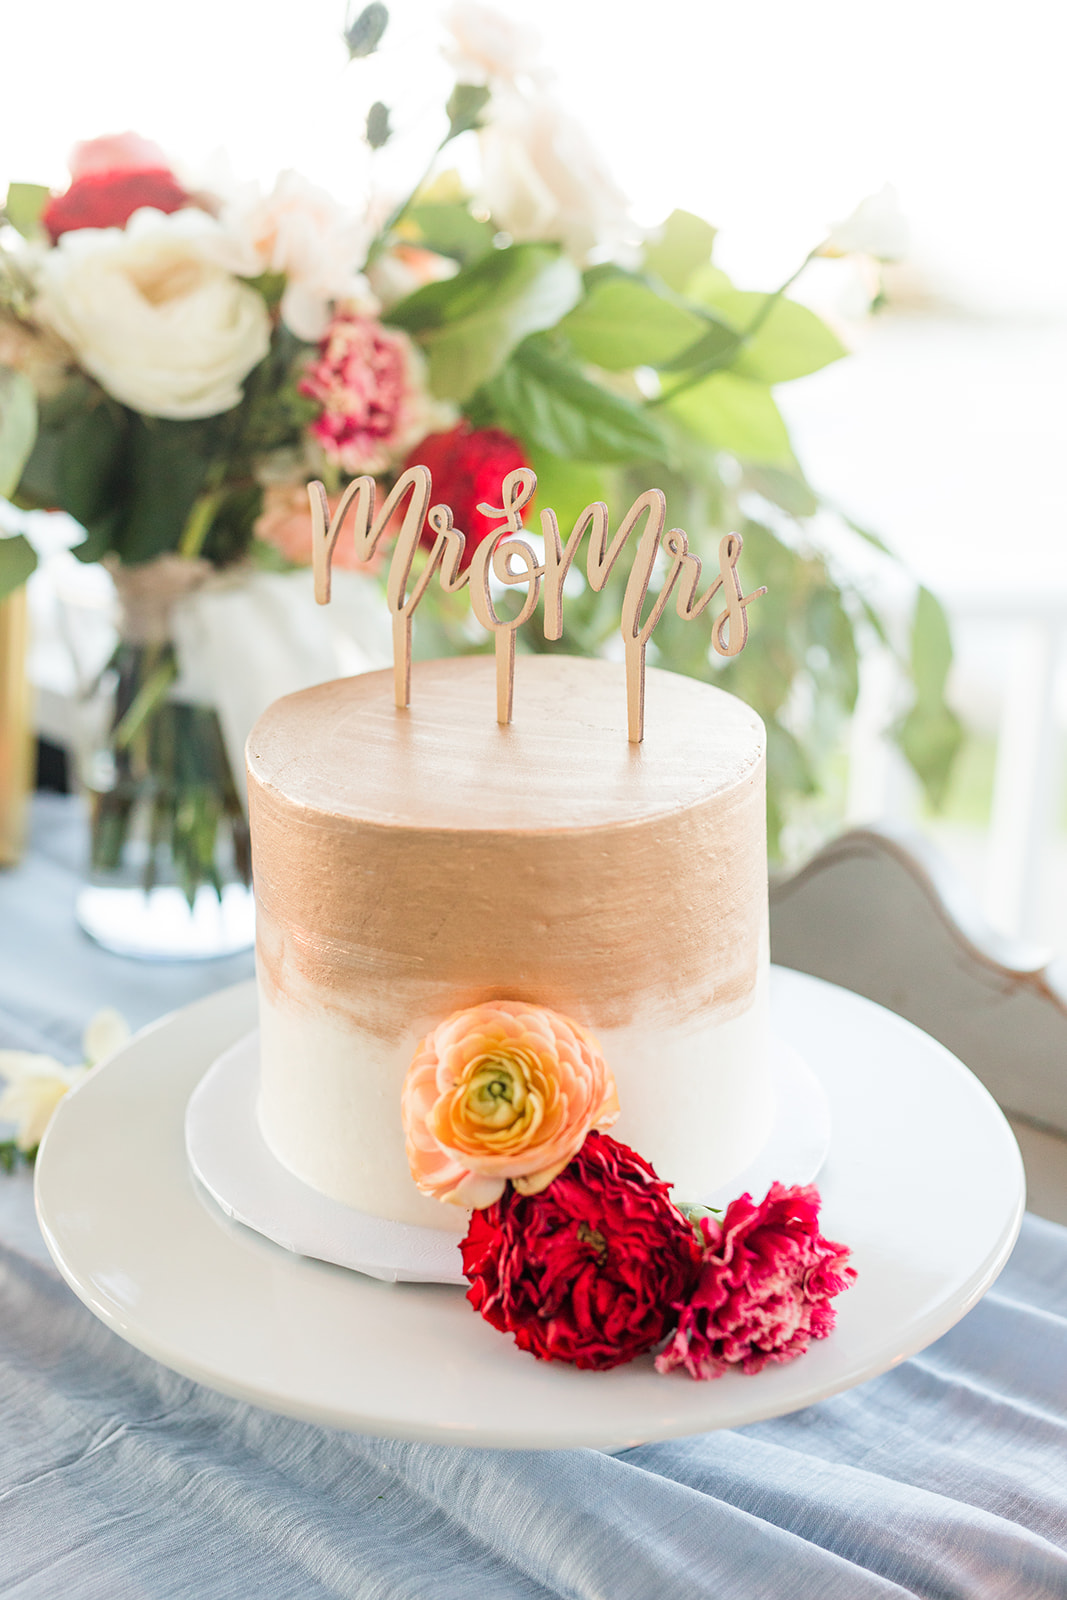 Gold and white cutting cake 